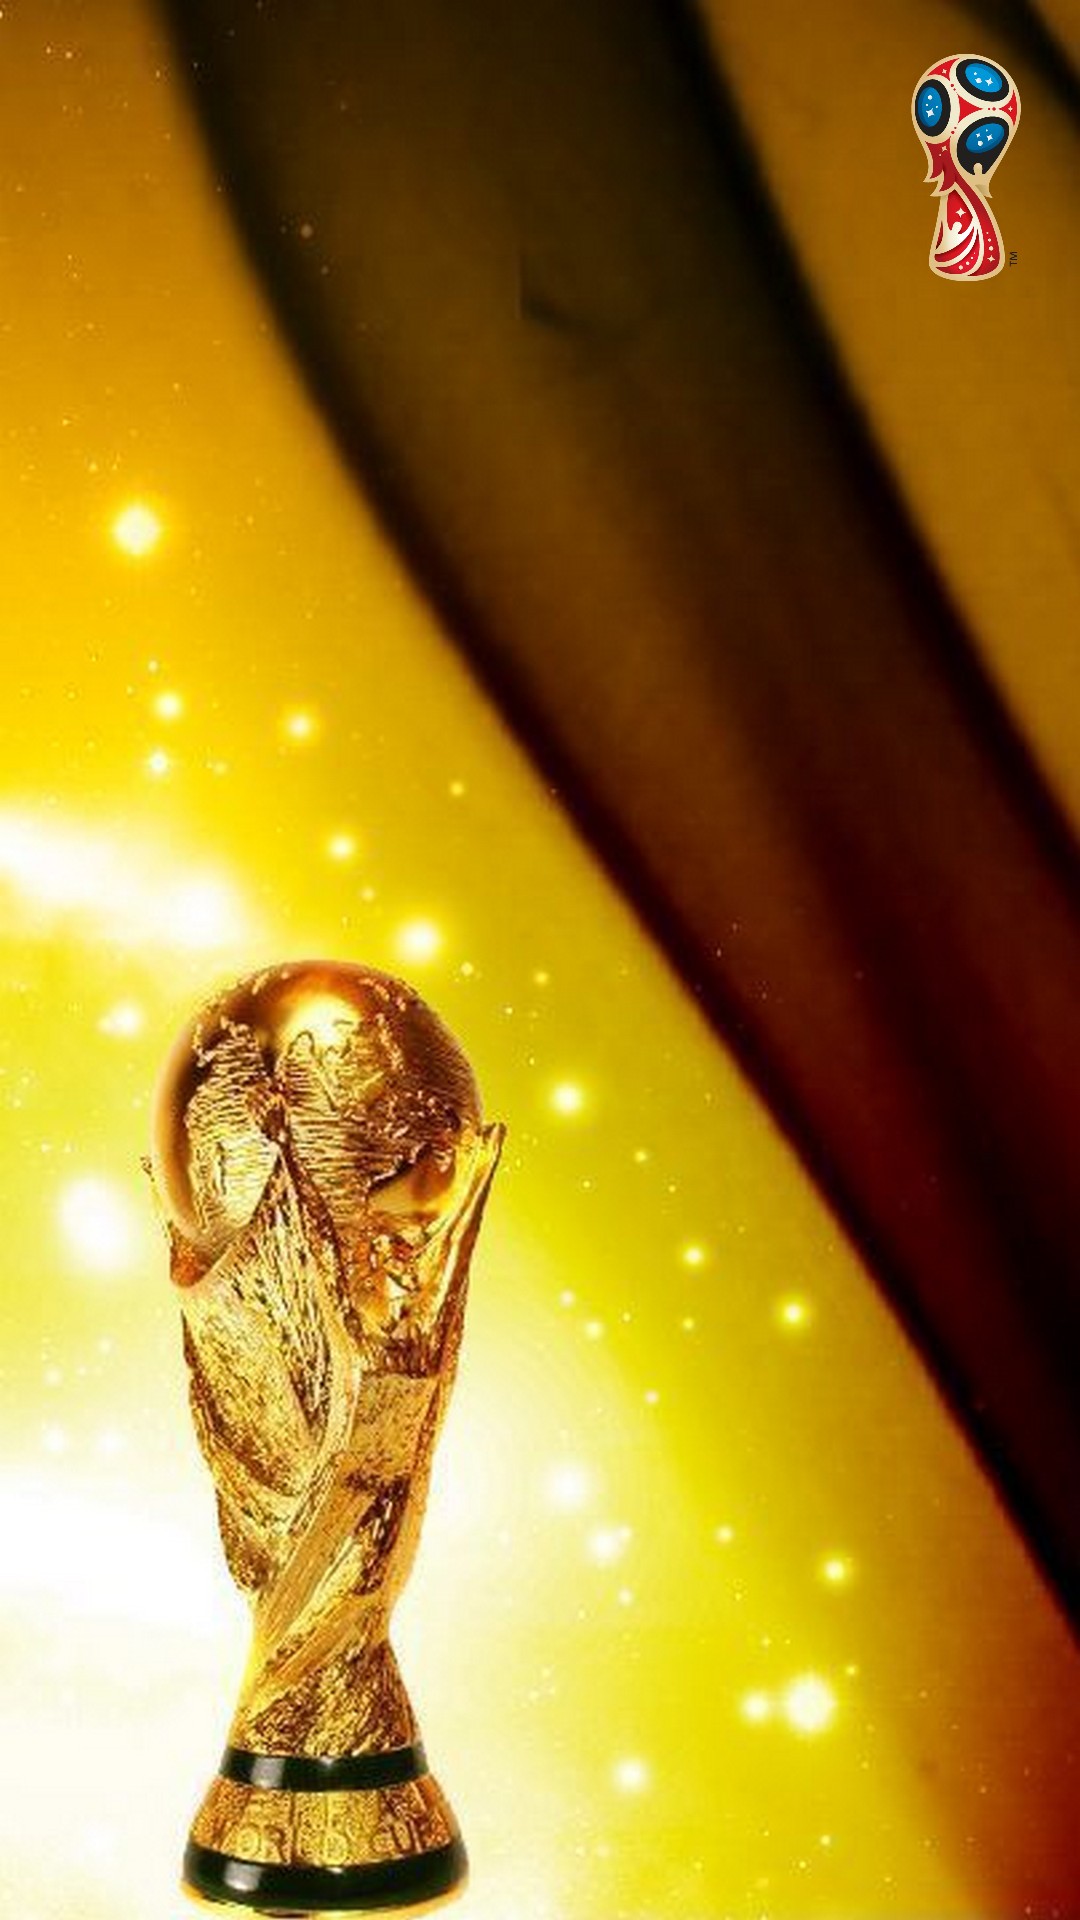 iPhone Wallpaper HD FIFA World Cup With Resolution 1080X1920 pixel. You can make this wallpaper for your Mac or Windows Desktop Background, iPhone, Android or Tablet and another Smartphone device for free